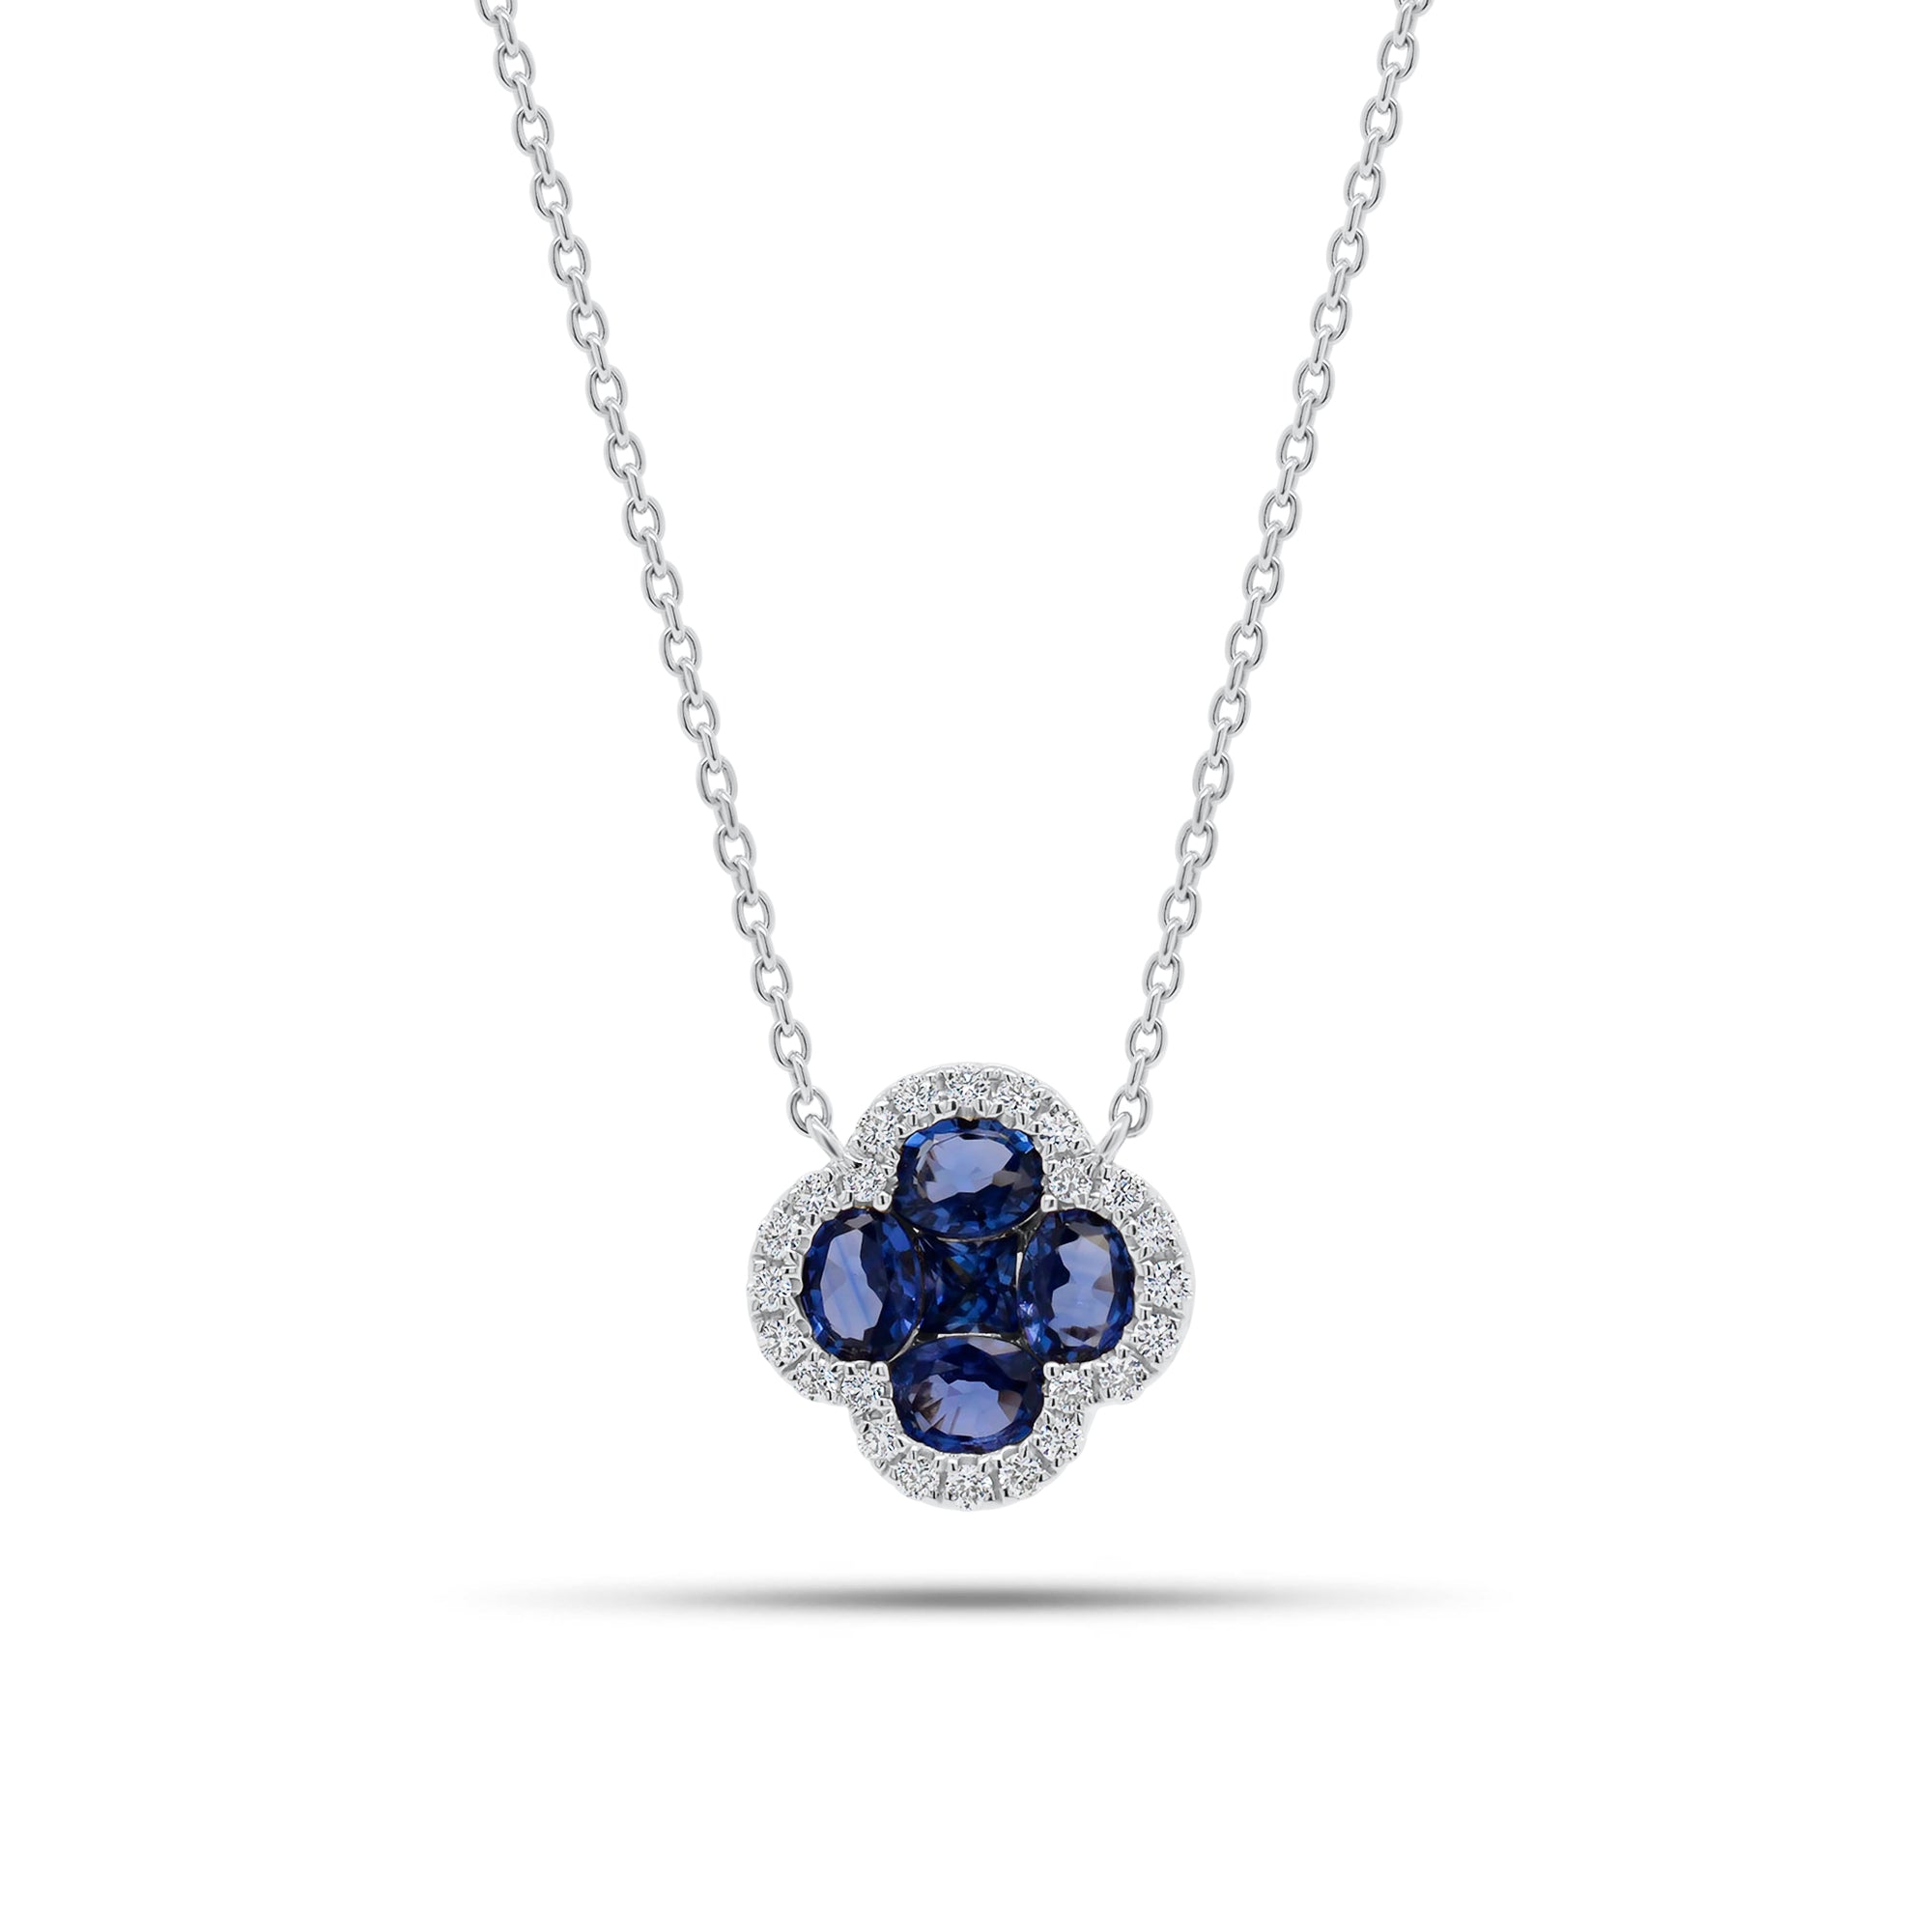 Sapphire & Diamond Clover Pendant Necklace - 14K gold weighing 2.70 grams  - 5 sapphires weighing 1.14 carats  - 24 round diamonds weighing 0.16 carats